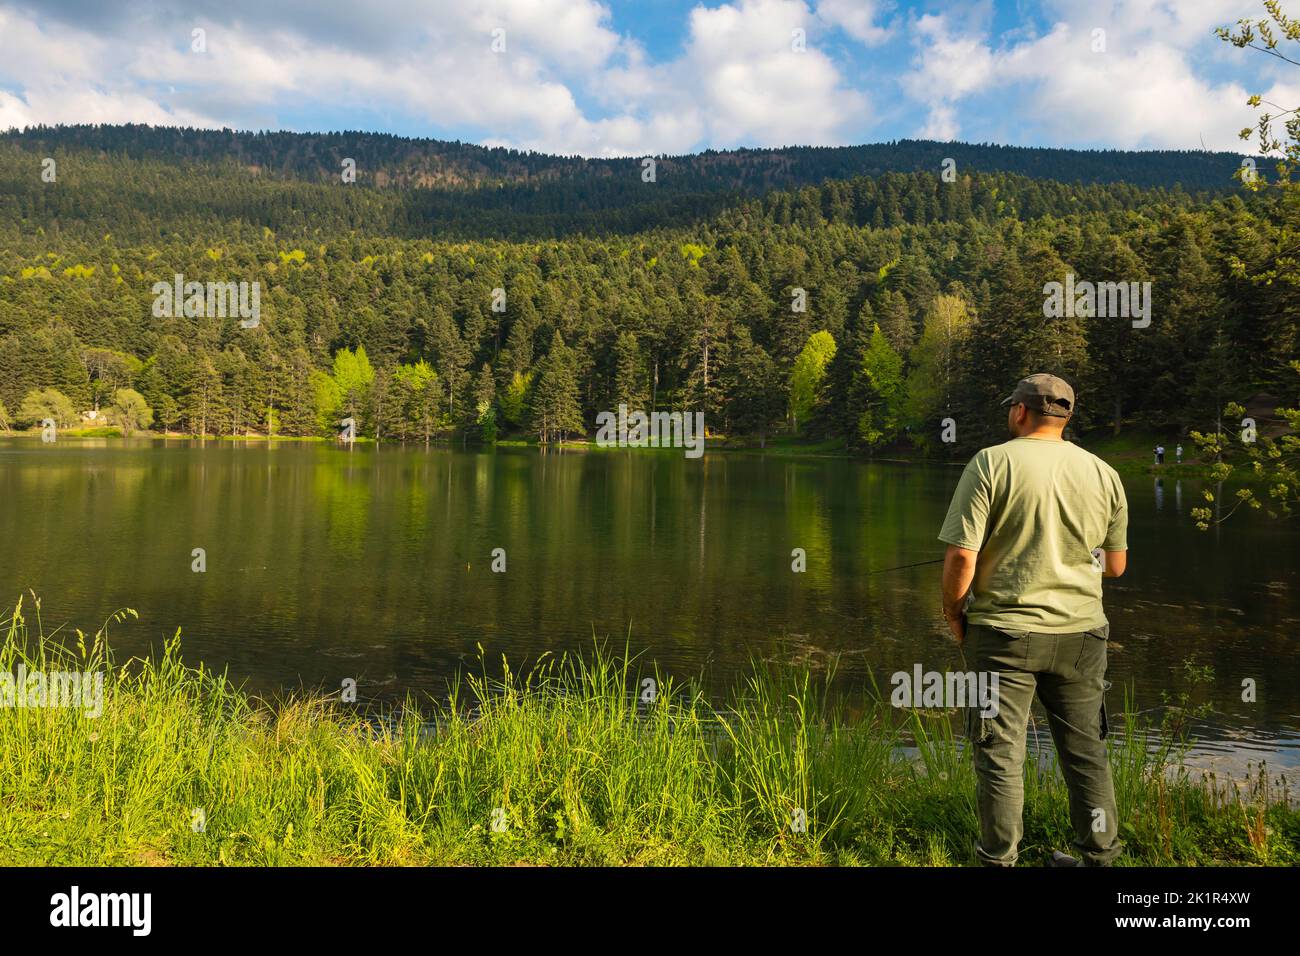 Fisher man fishing near the lake in the forest. Hobby or leisure activity photo Stock Photo